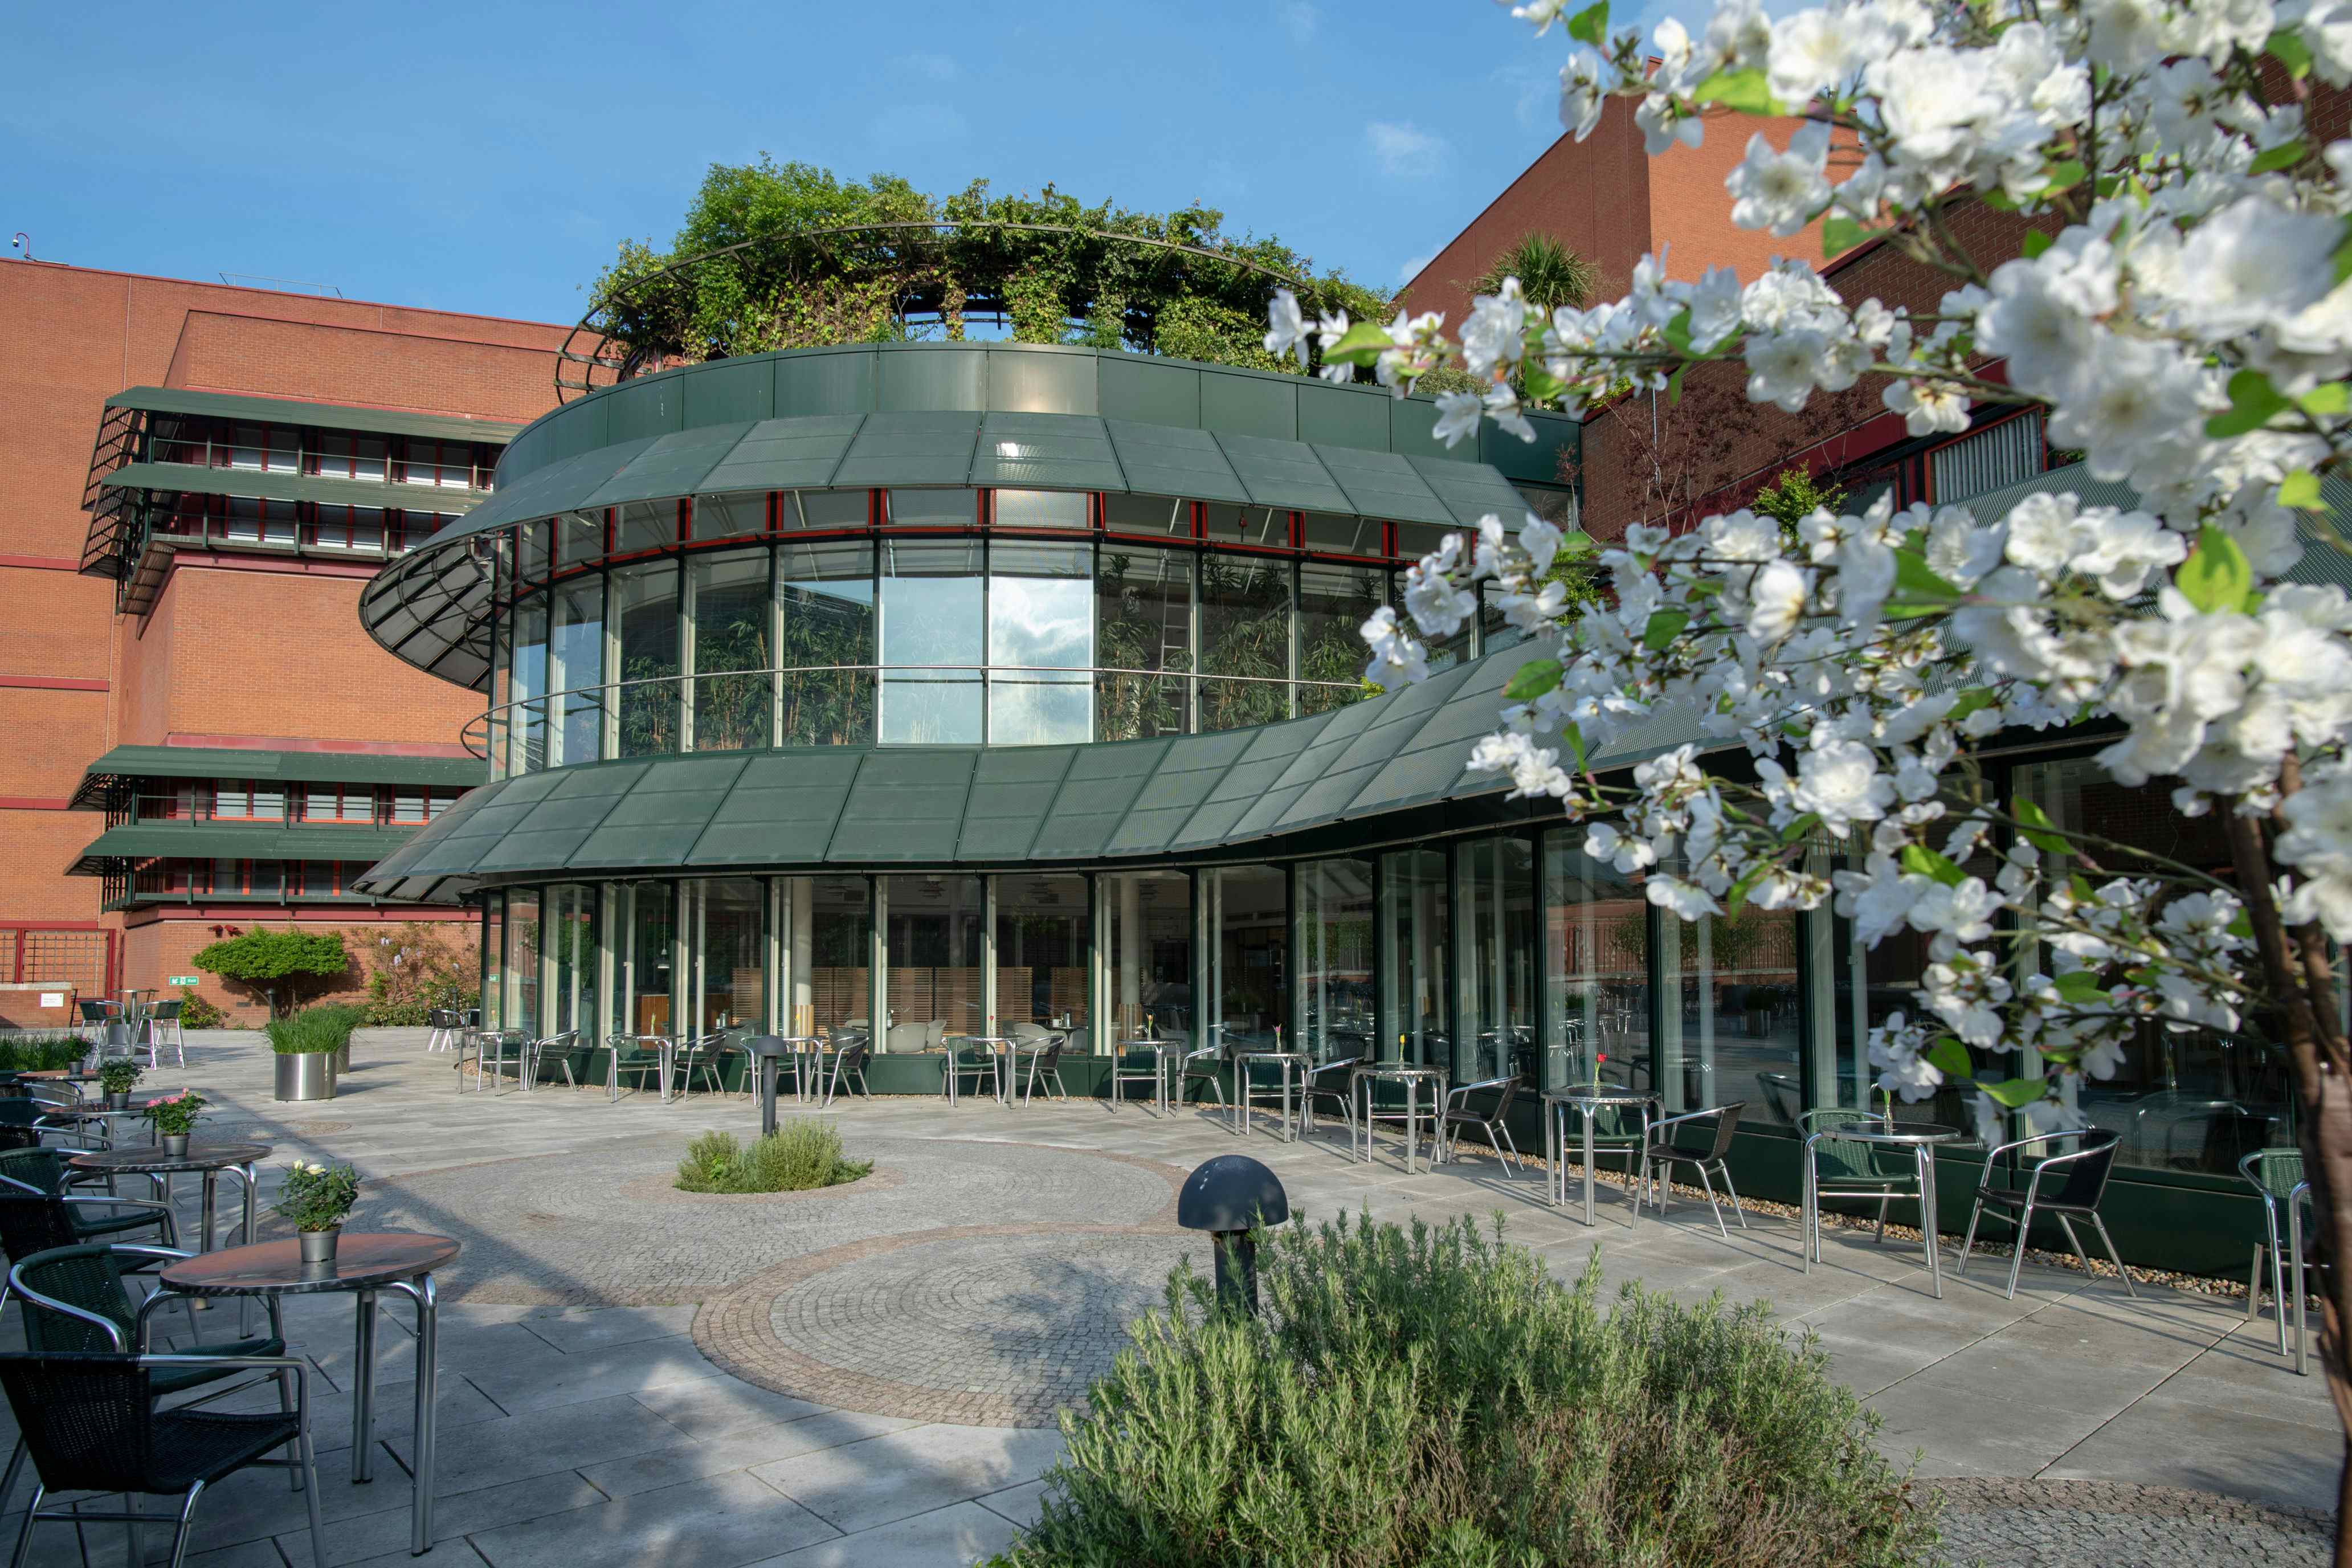 Terrace Restaurant and Outdoor Terrace, British Library